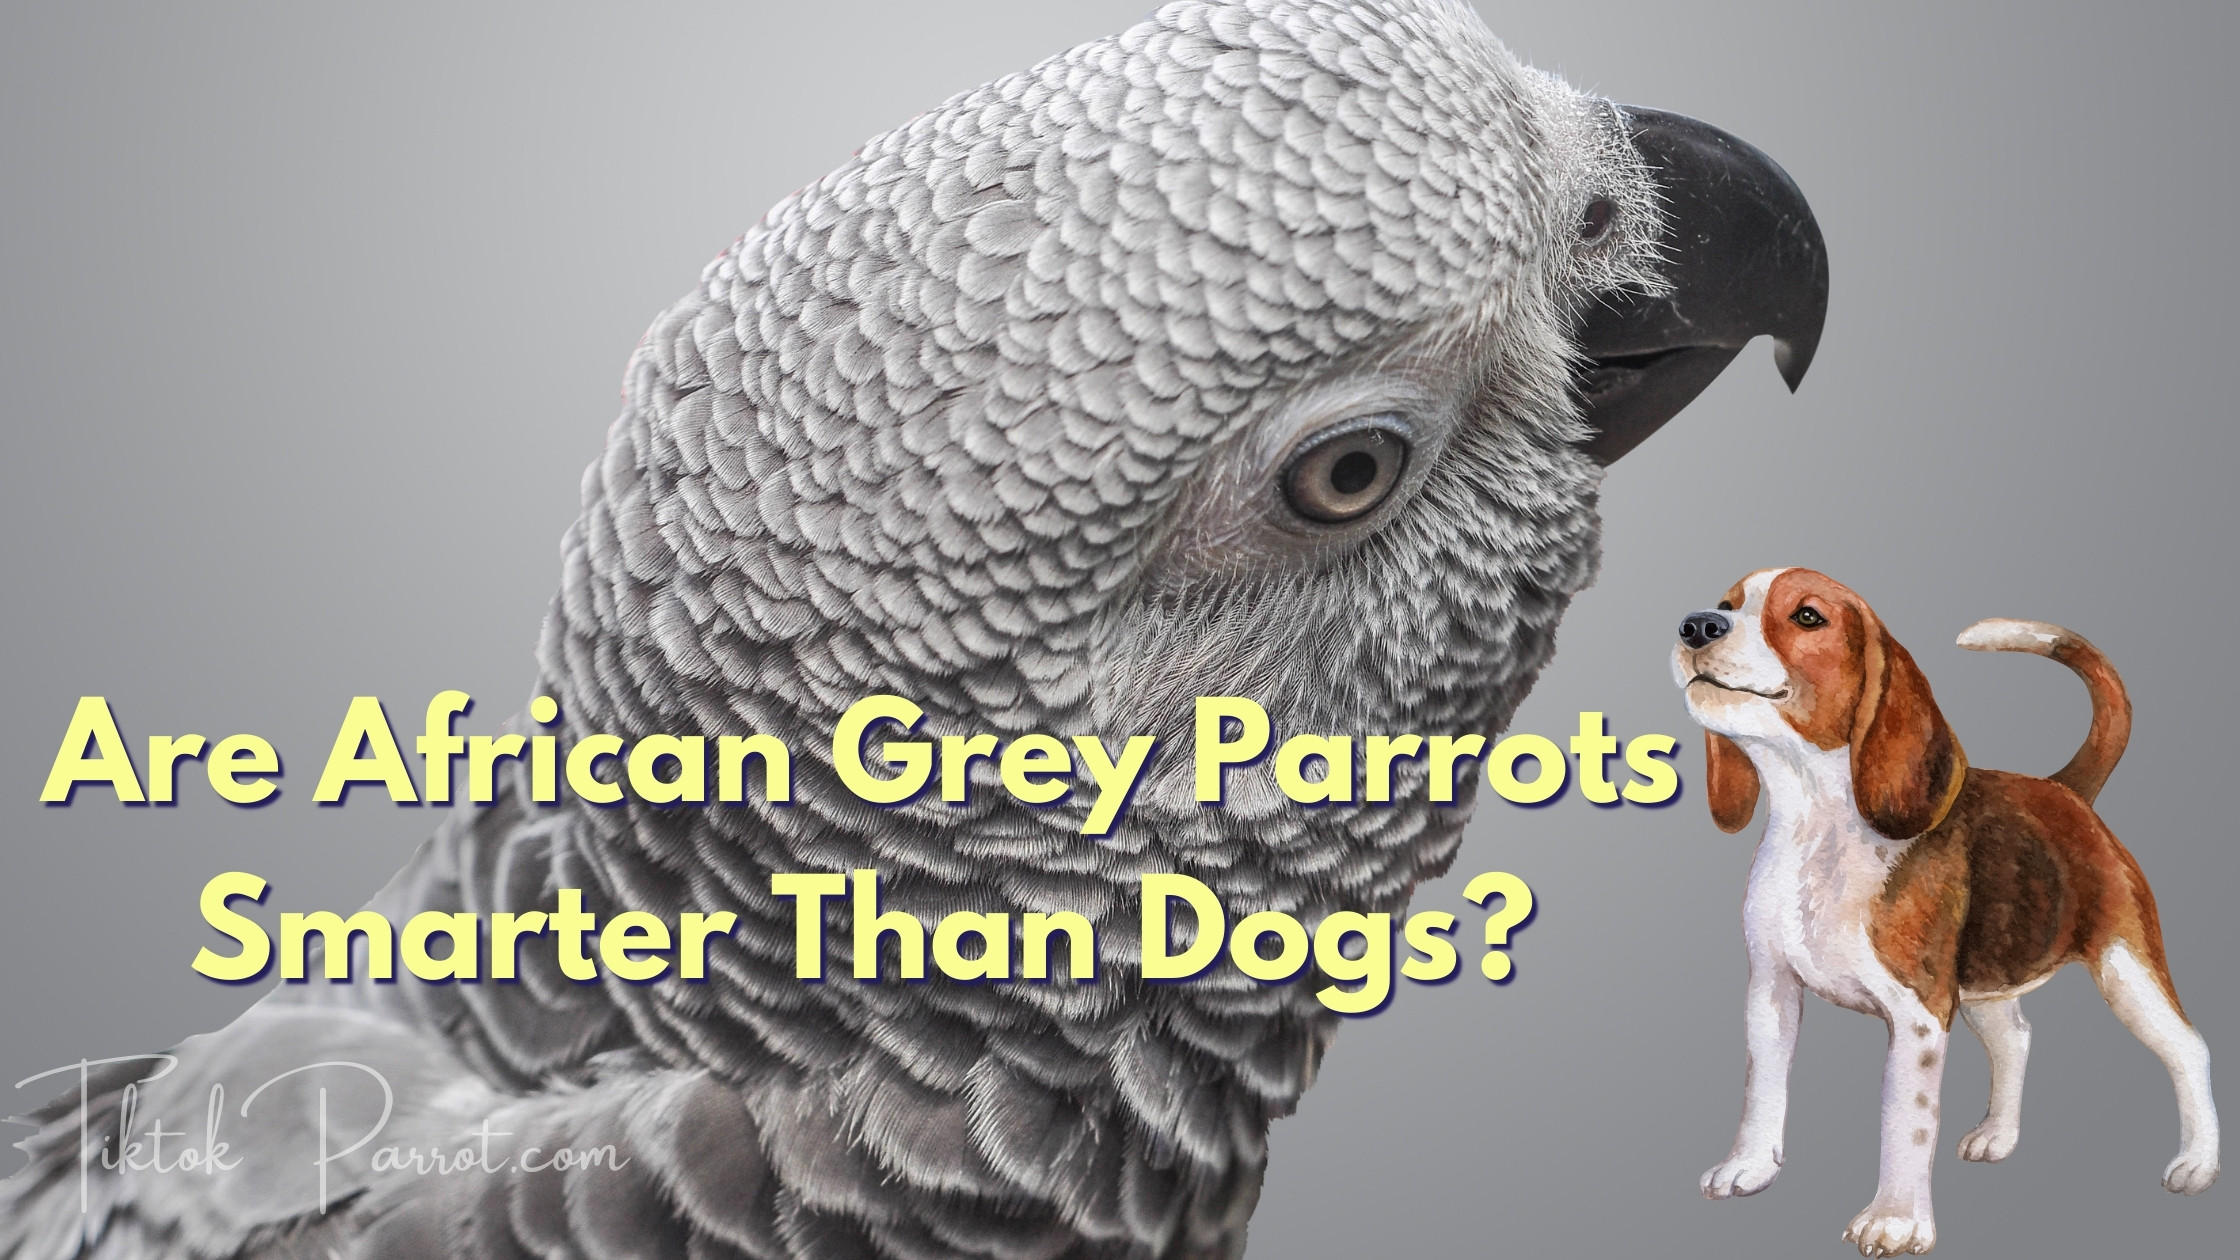 Are African Grey Parrots Smarter Than Dogs